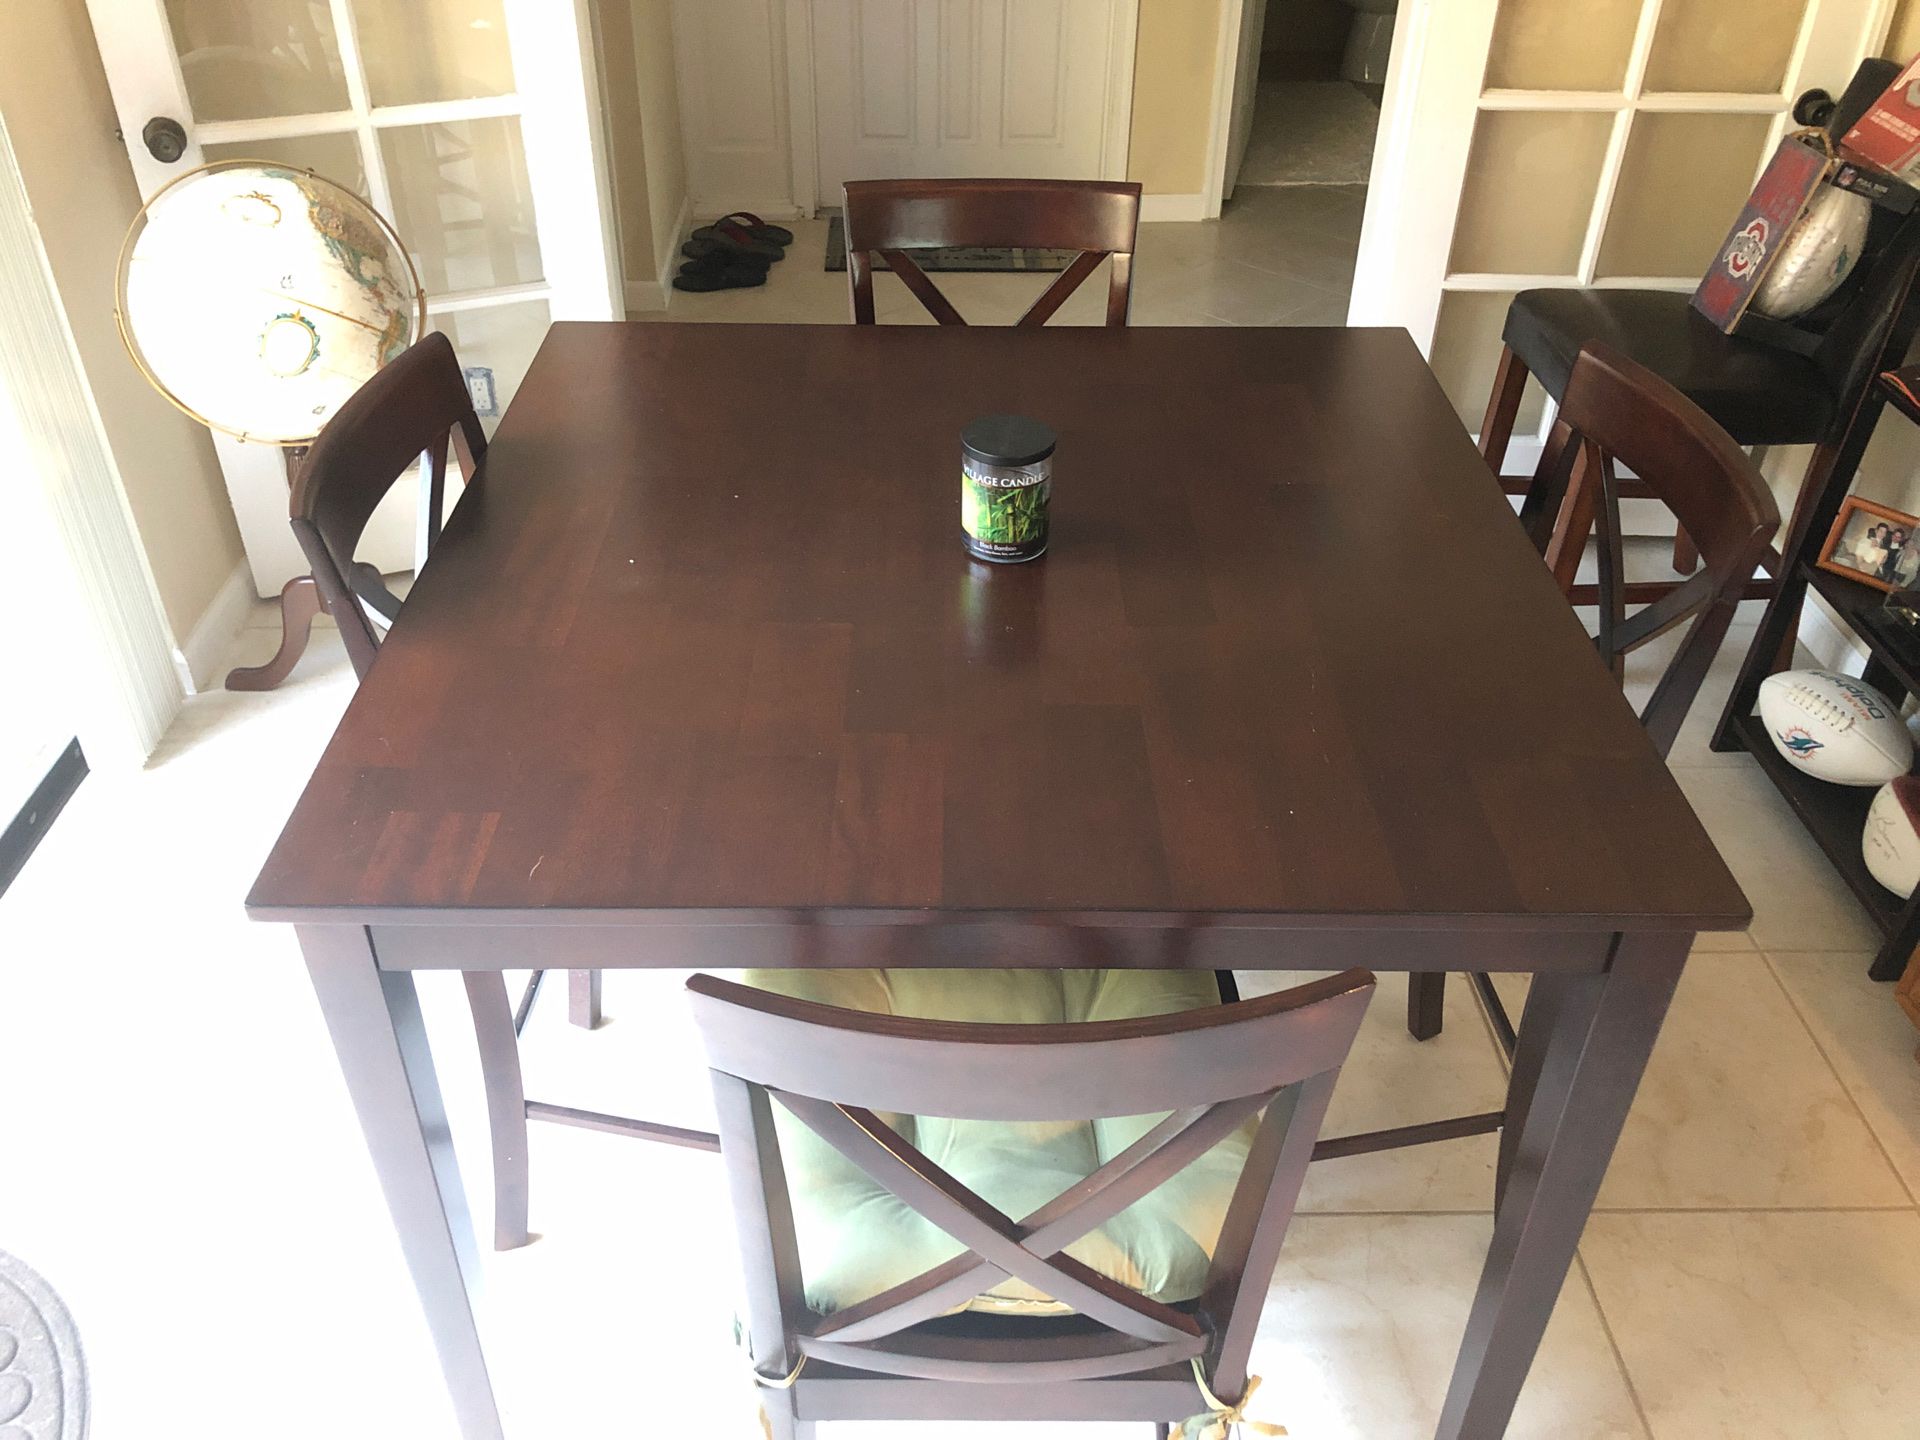 A STEAL!! I need it gone... moving. 5 piece high top kitchen table